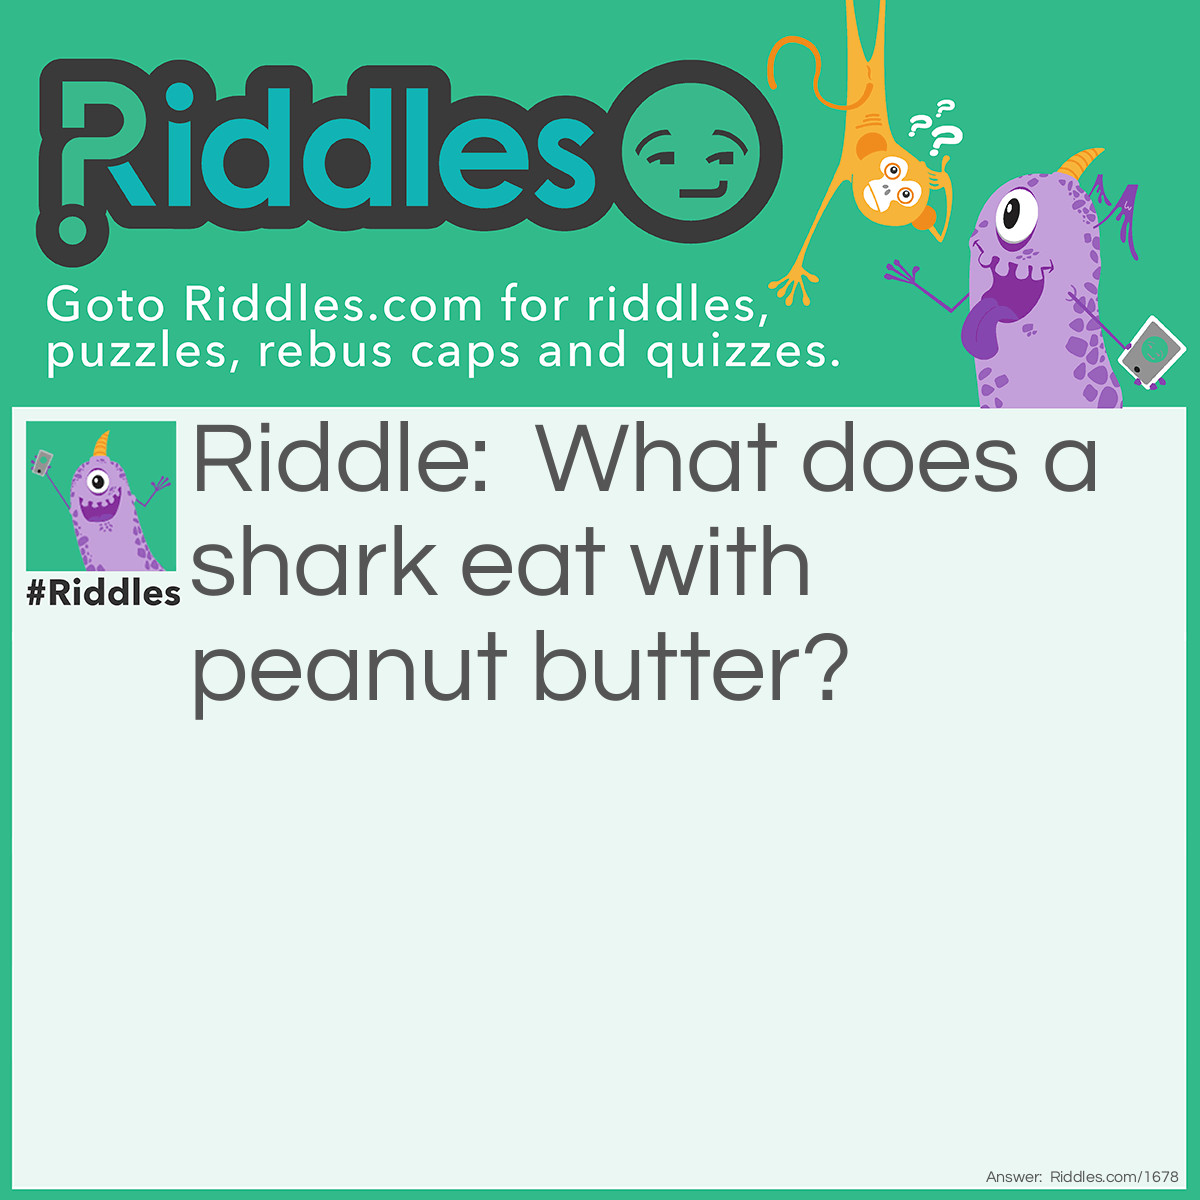 Riddle: What does a shark eat with peanut butter? Answer: Jellyfish!